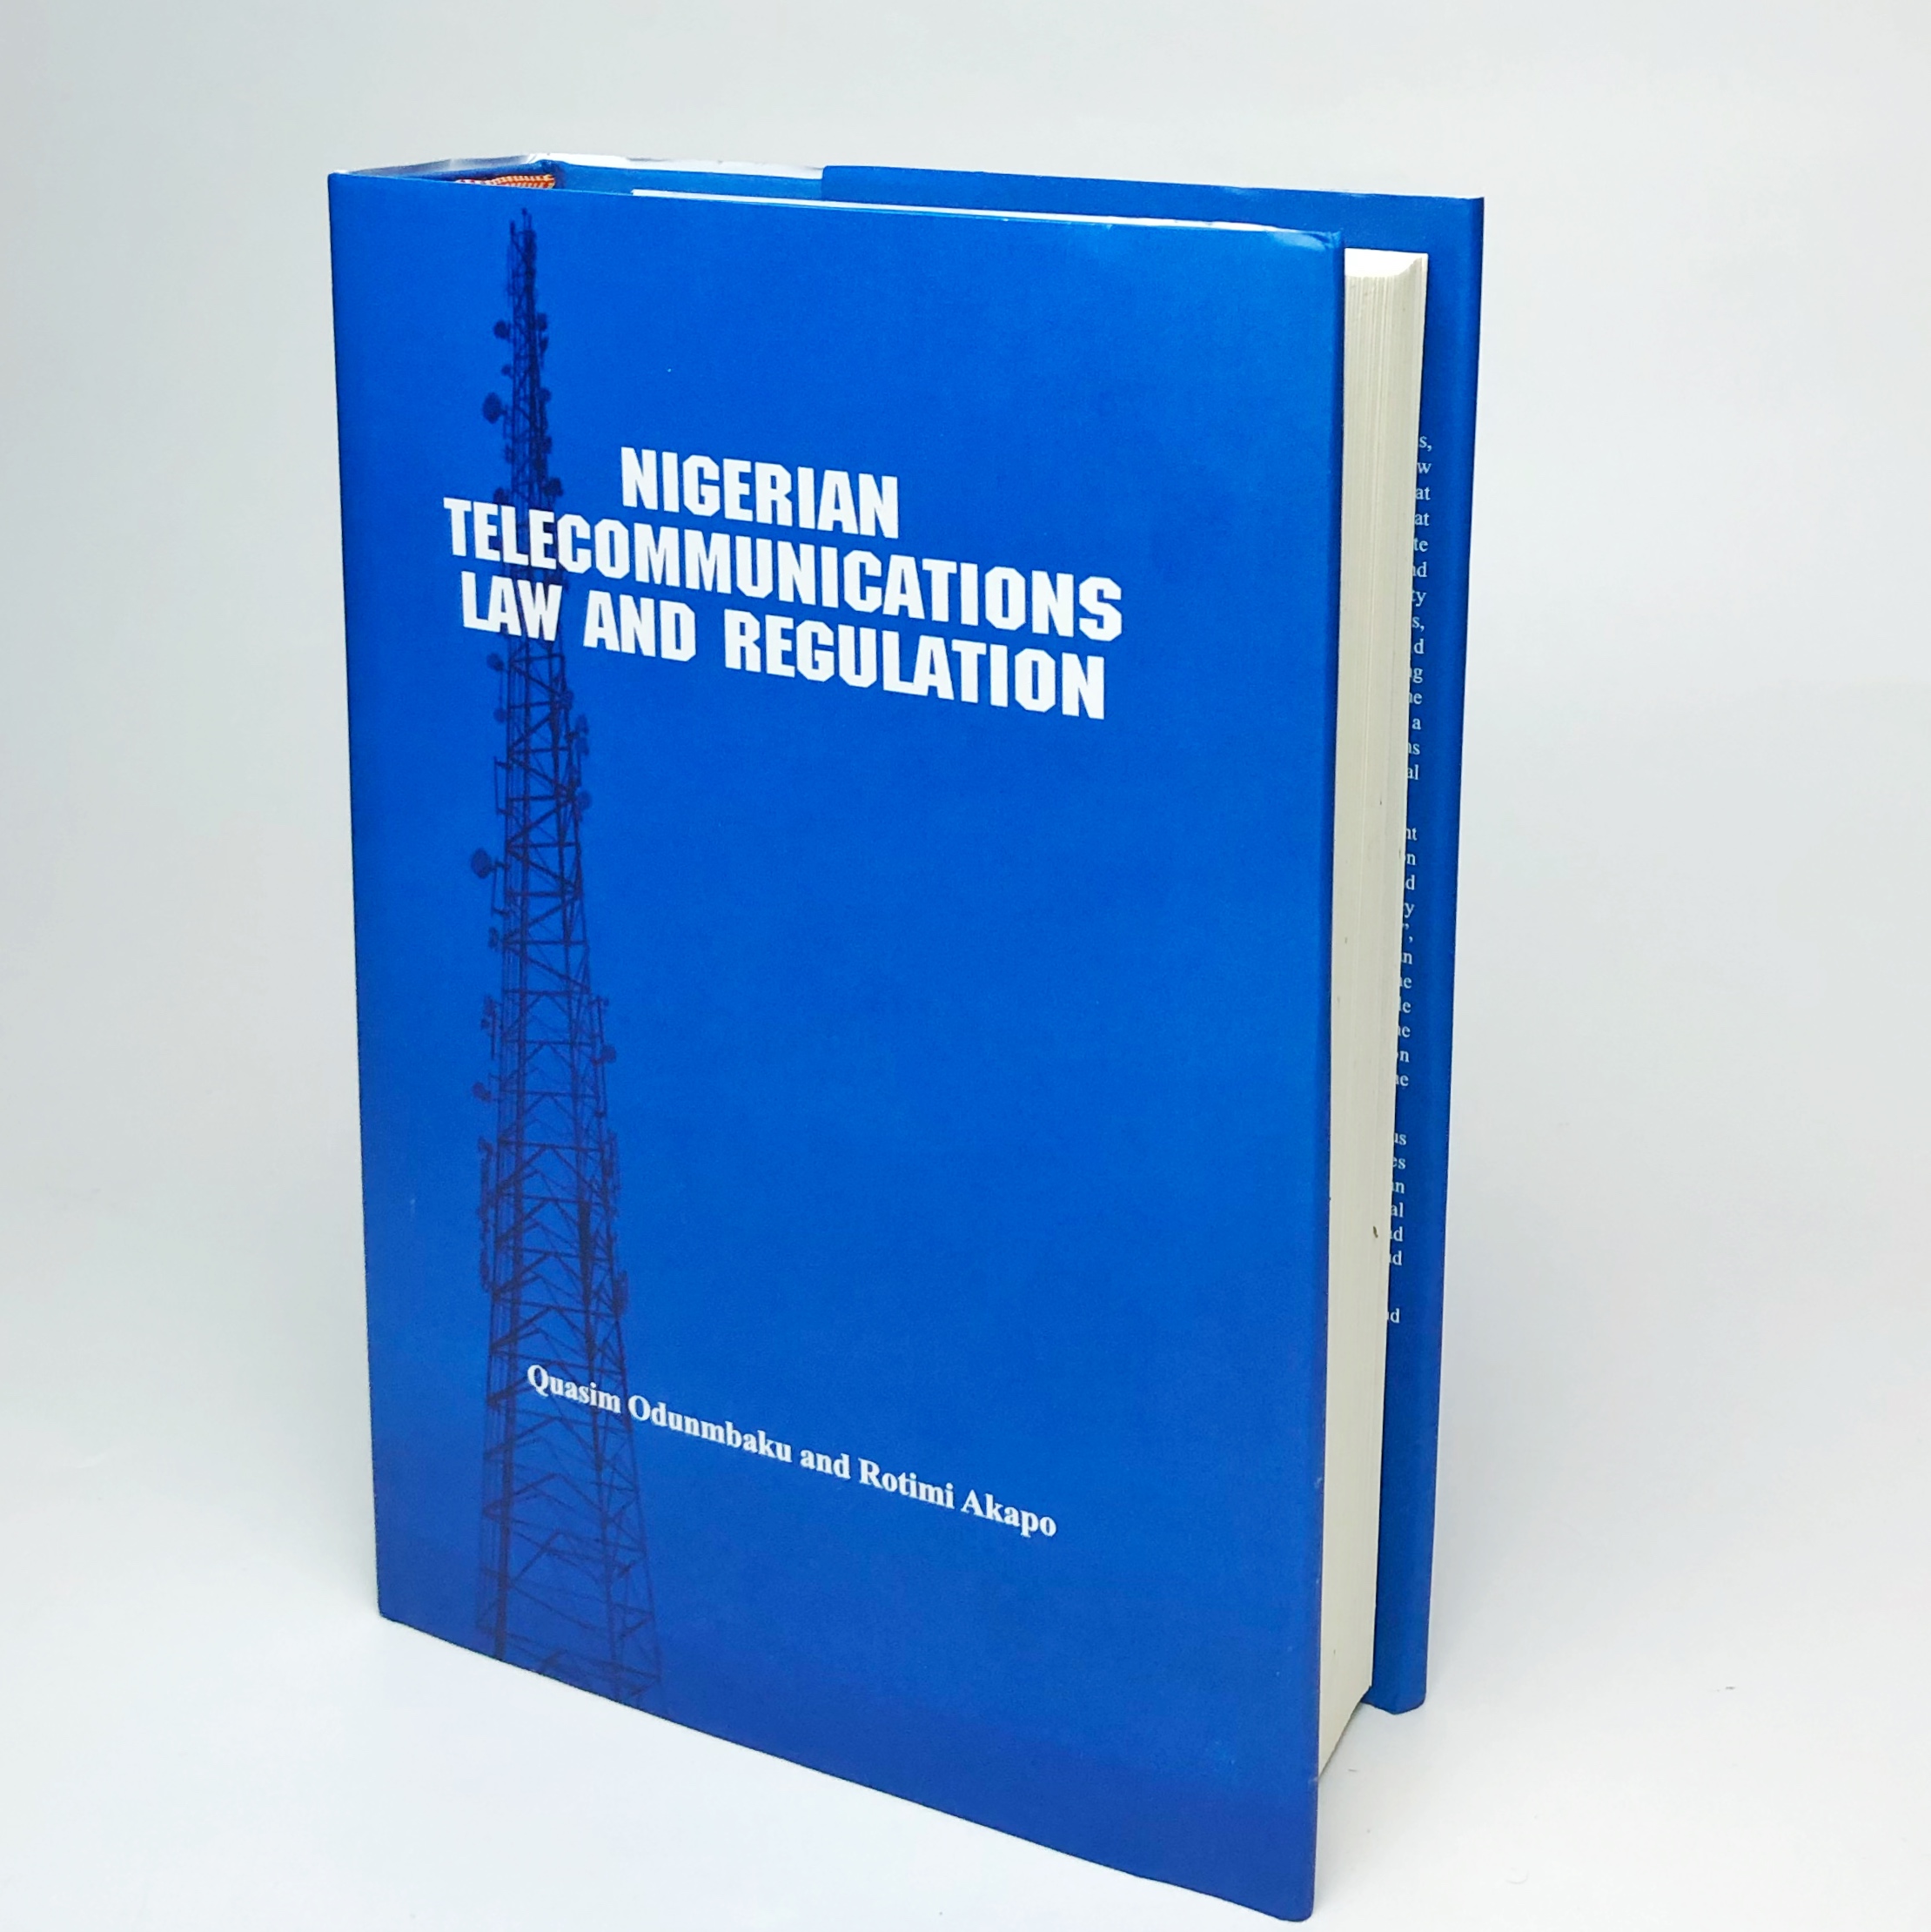 stakeholders endorse book on Telecoms Law, Regulations